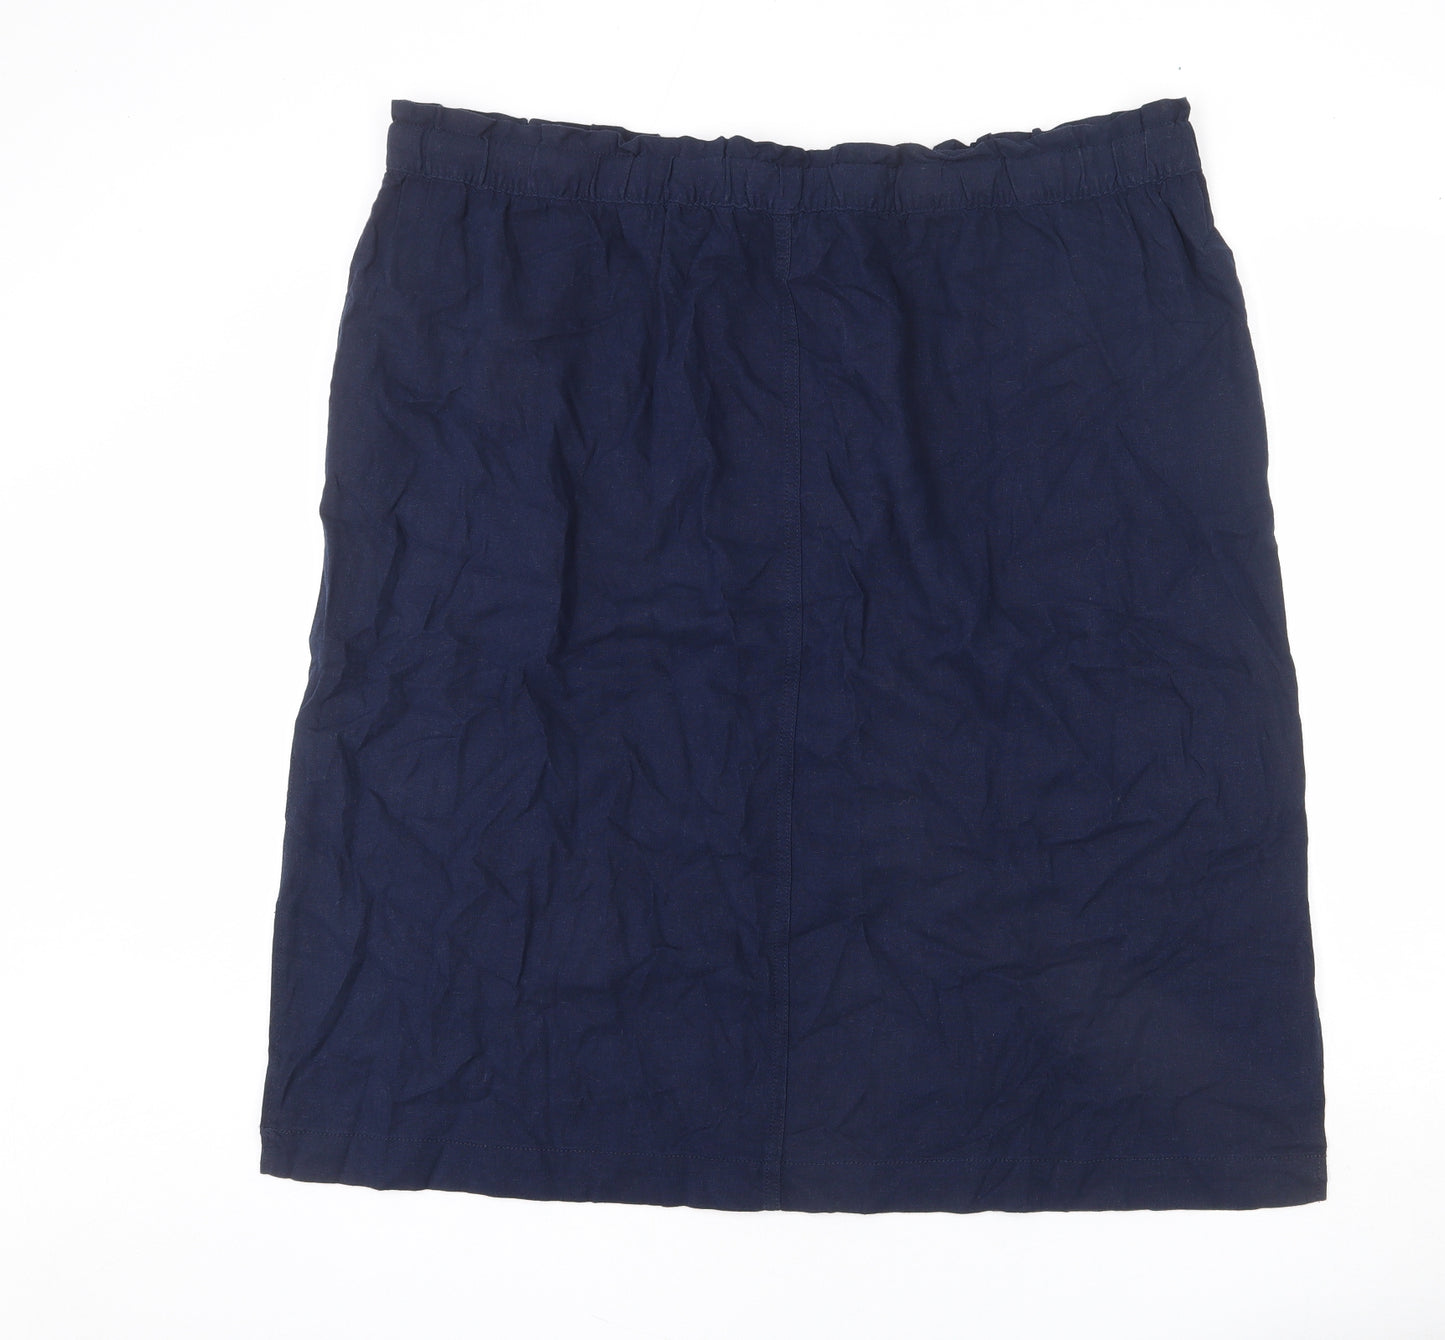 Marks and Spencer Womens Blue Linen A-Line Skirt Size 24